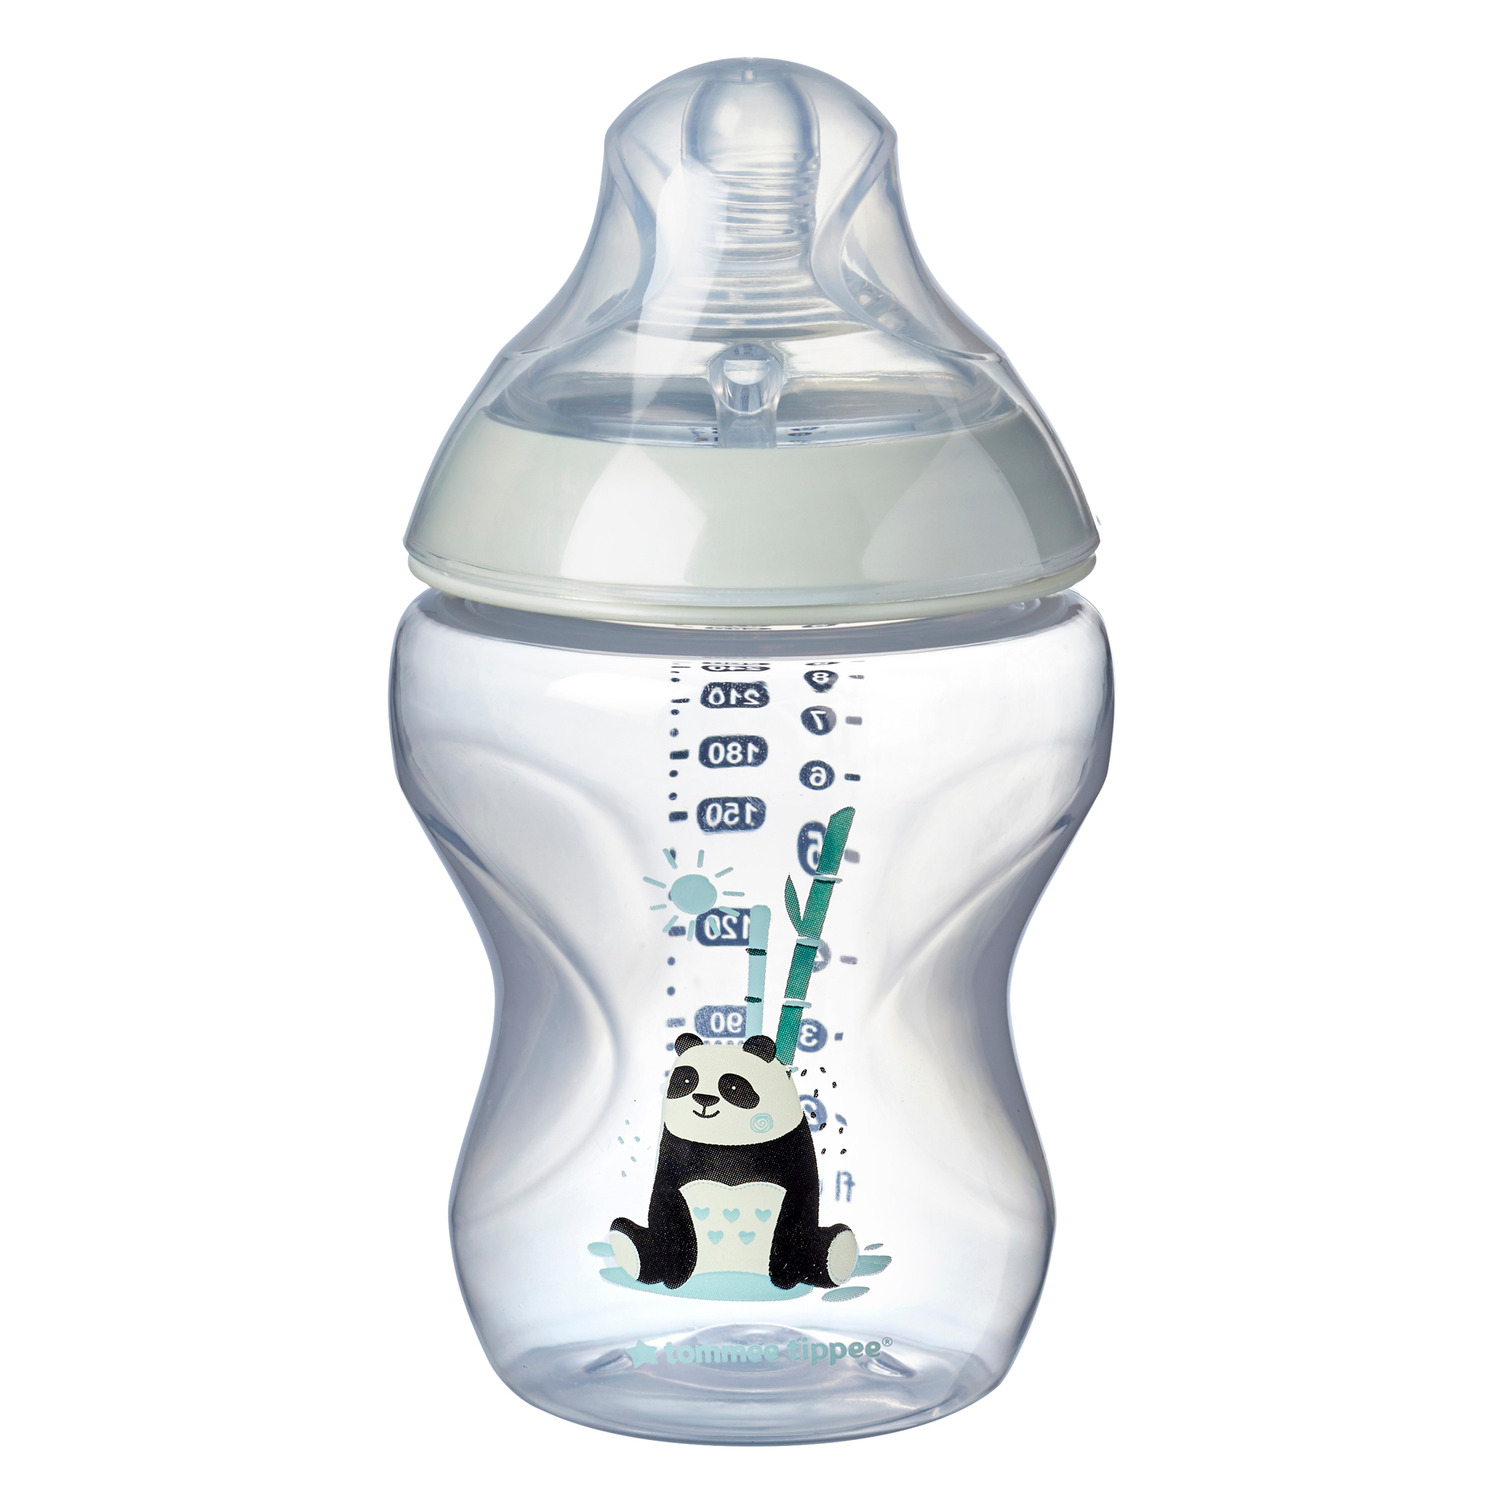 Biberon Closer To Nature, Tommee Tippee de Tommee Tippee